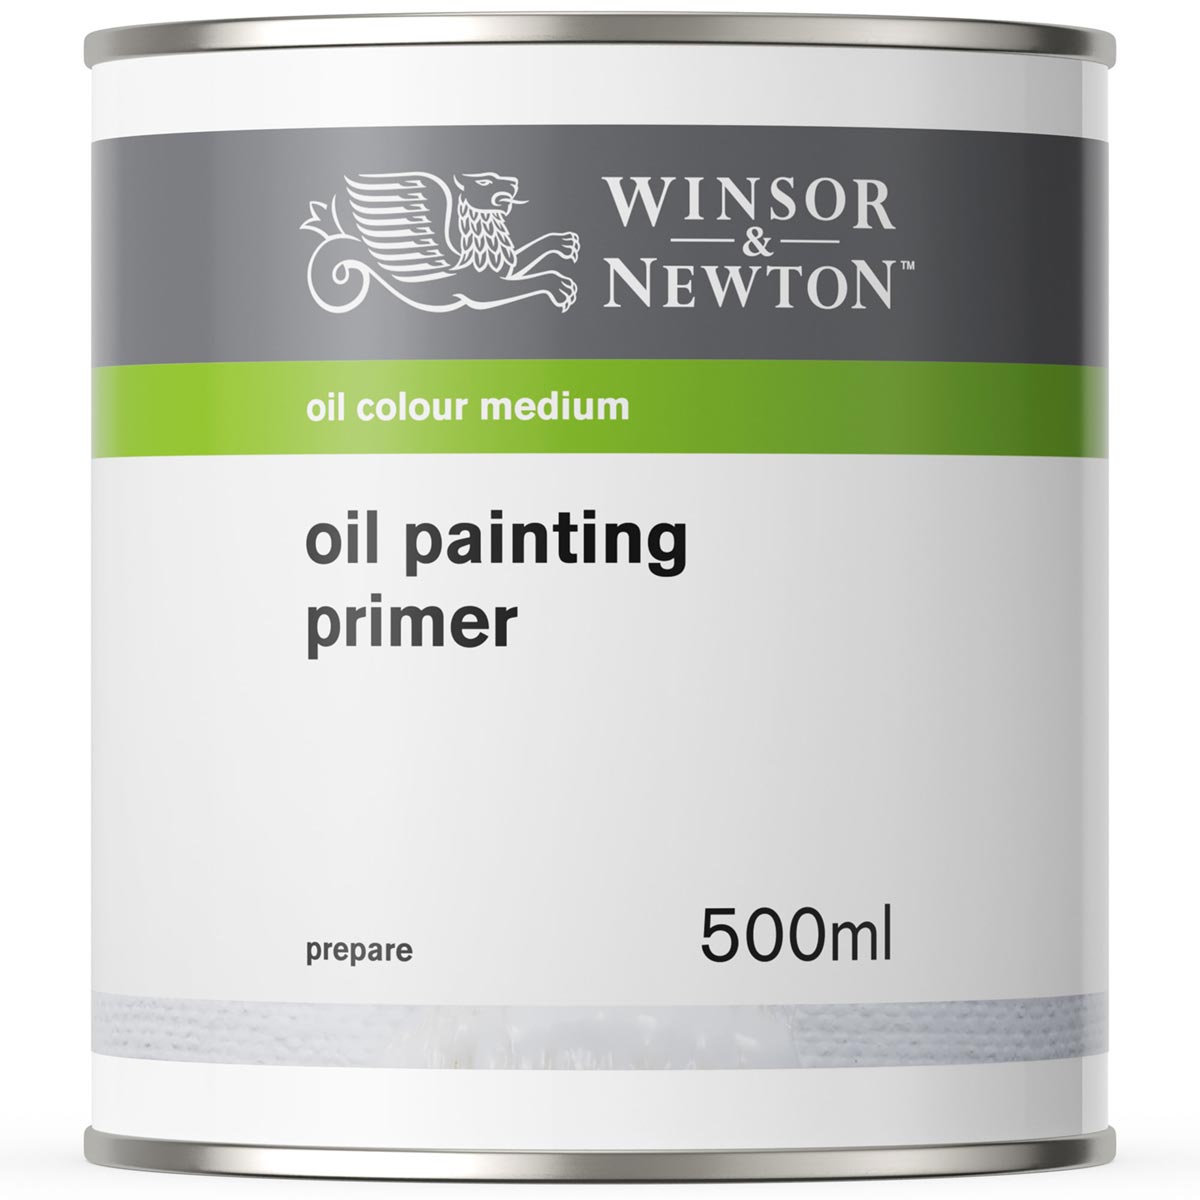 Winsor and Newton - Oil Painting Primer - 500ml